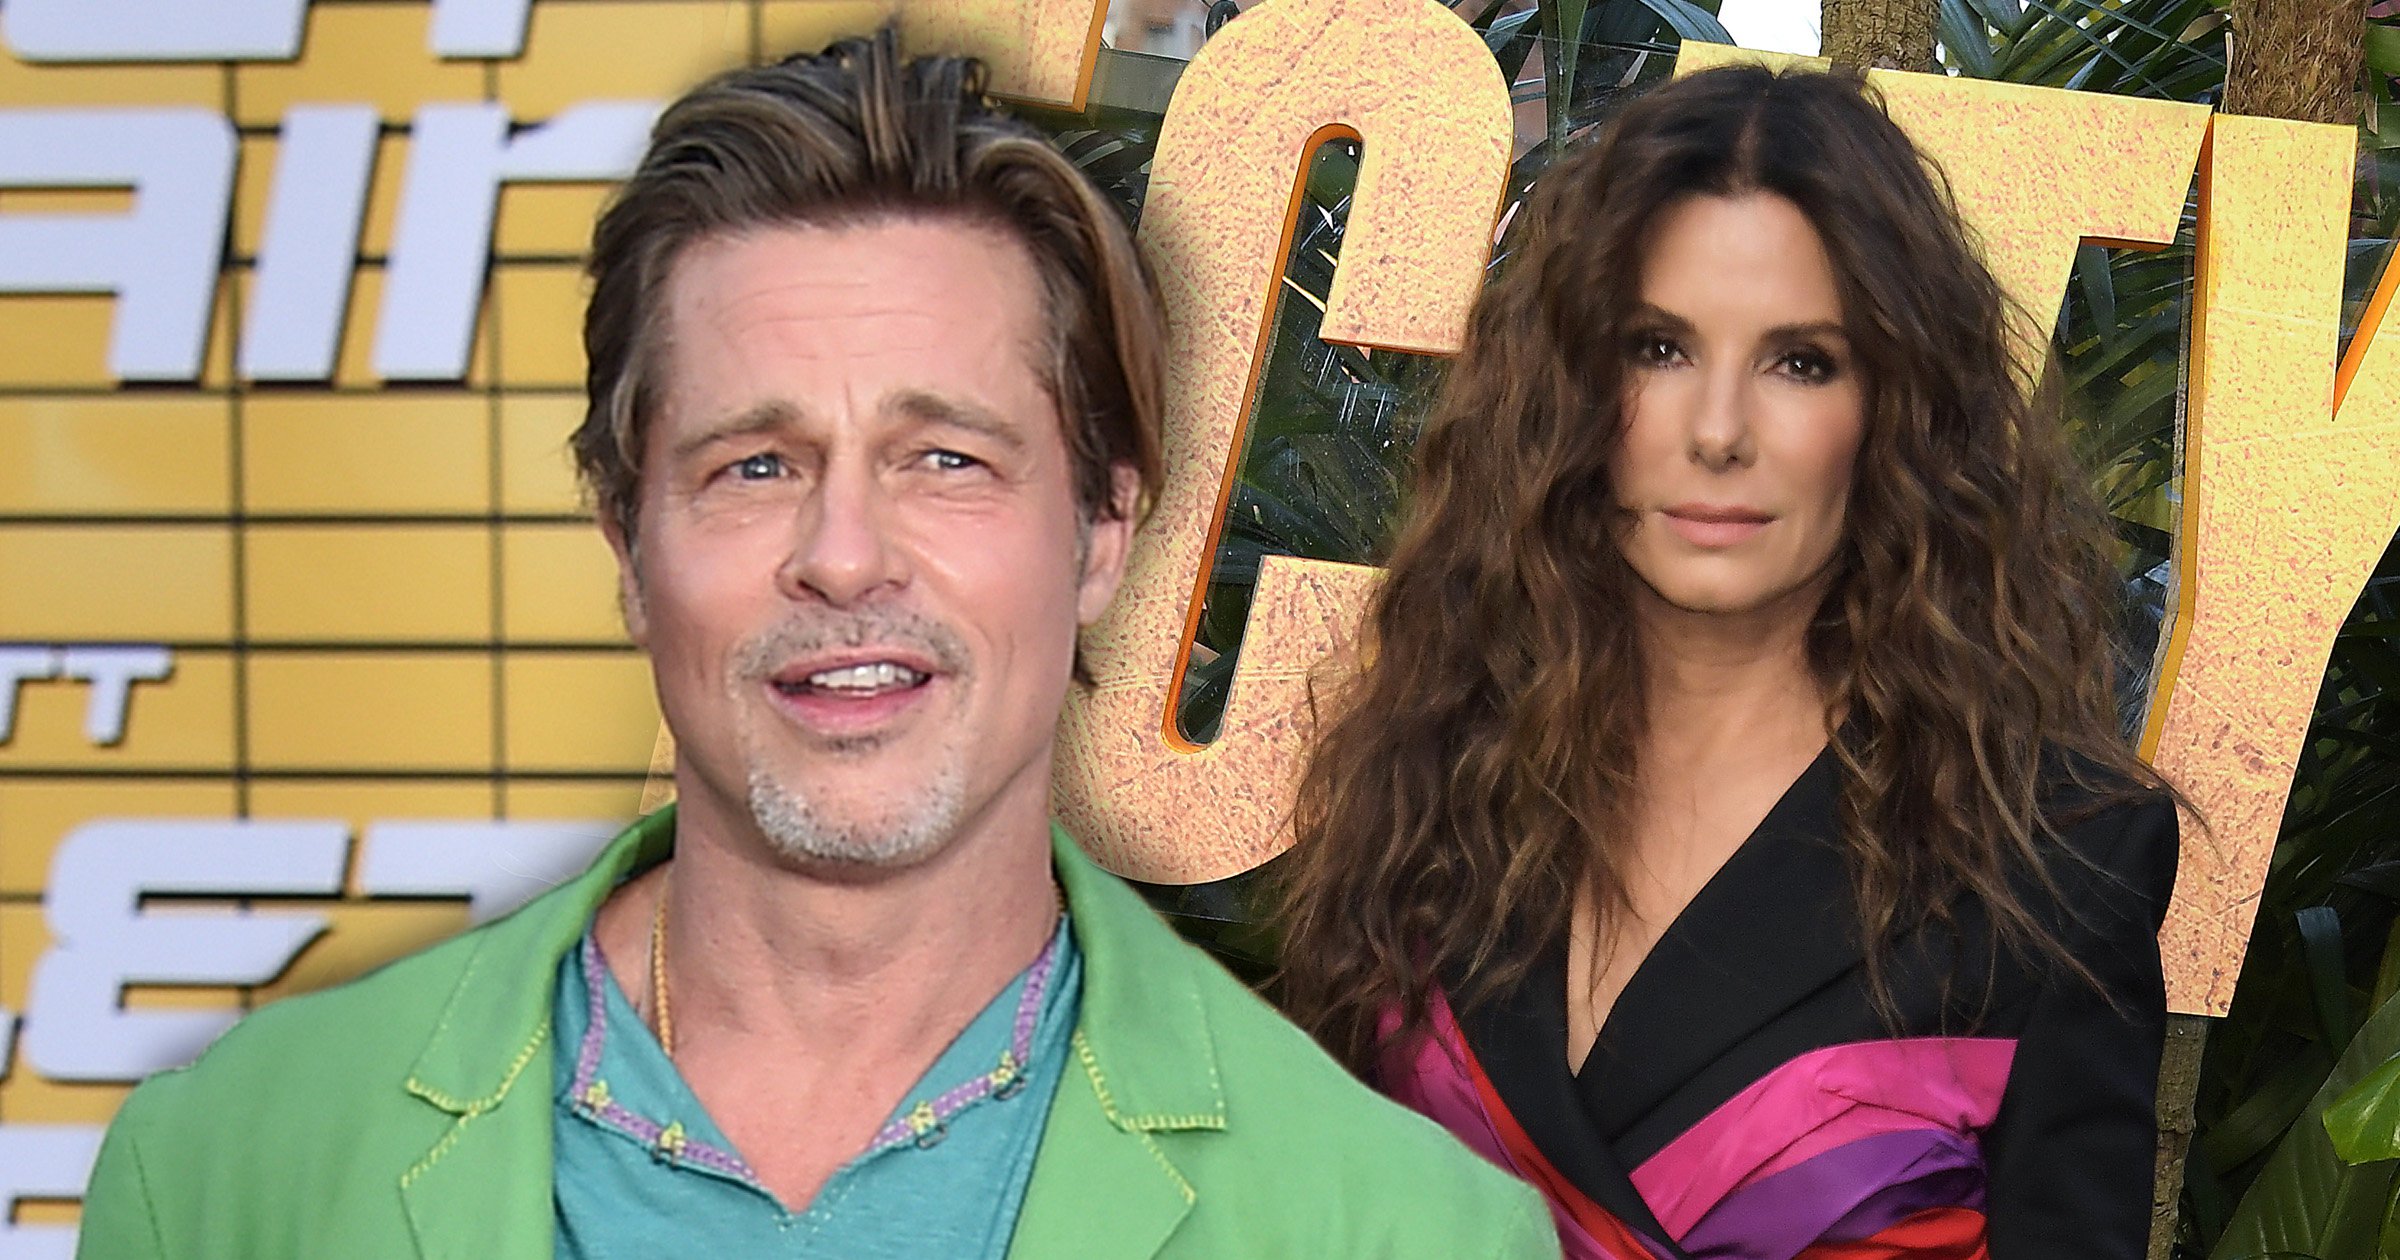 Brad Pitt reveals he and bestie Sandra Bullock came up with a movie idea that was axed – about QVC